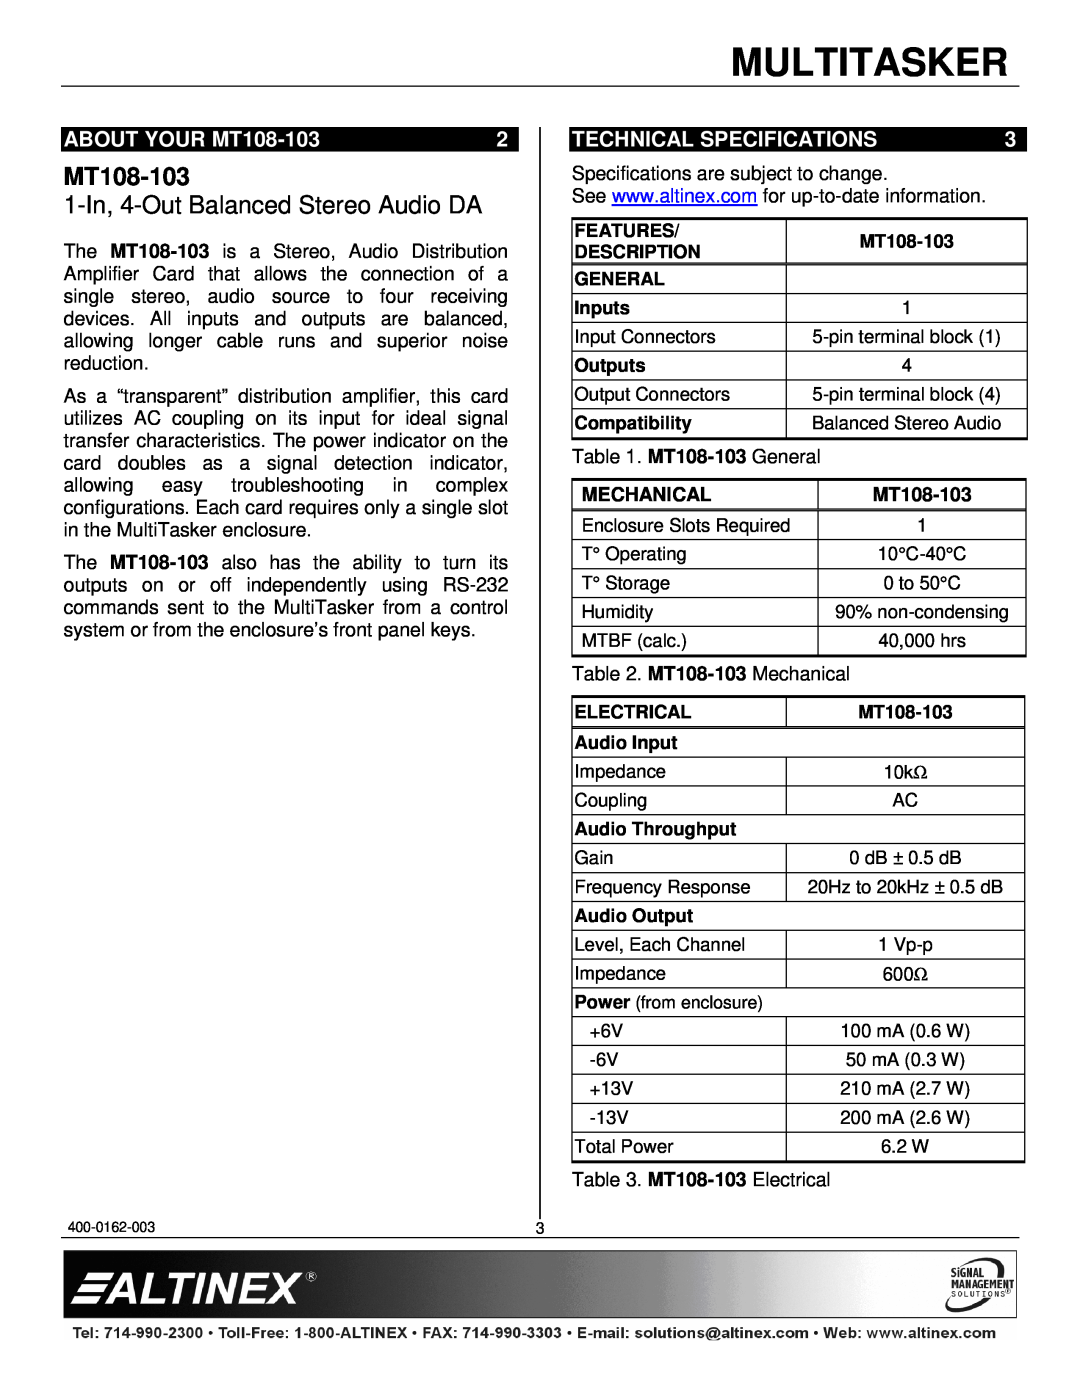 Altinex manual ABOUT YOUR MT108-103, Technical Specifications, Multitasker, 1-In, 4-OutBalanced Stereo Audio DA 